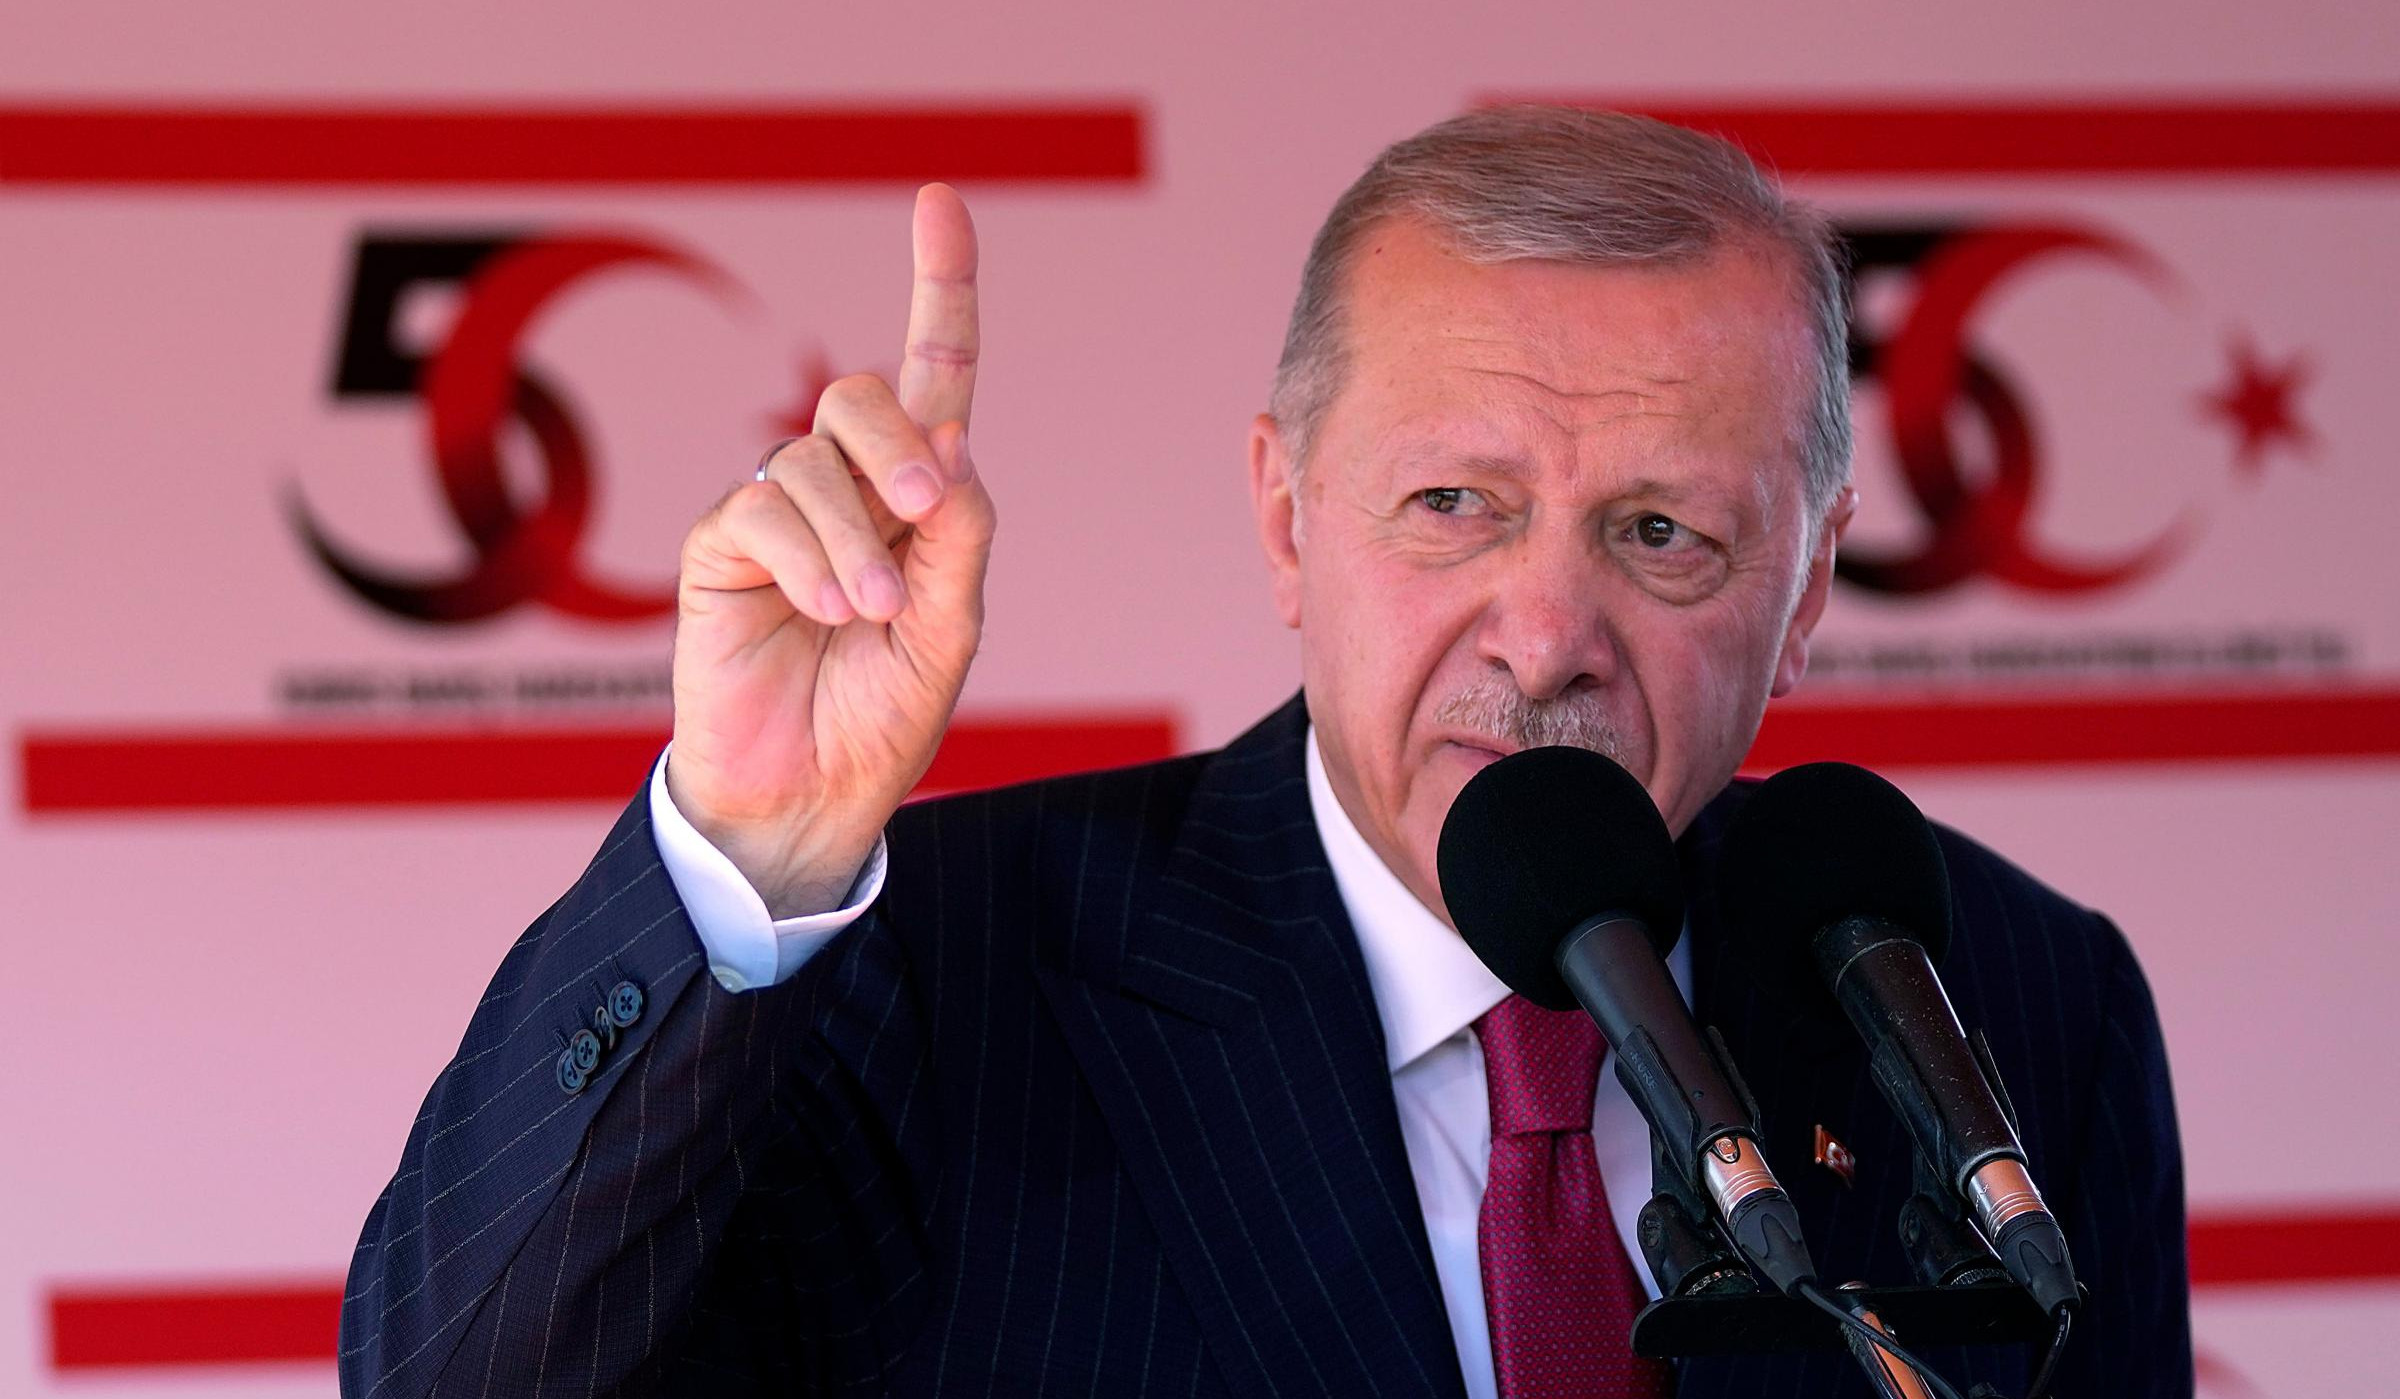 Erdoğan dismisses UN plan for federated Cyprus, reaffirms commitment to two-state peace deal